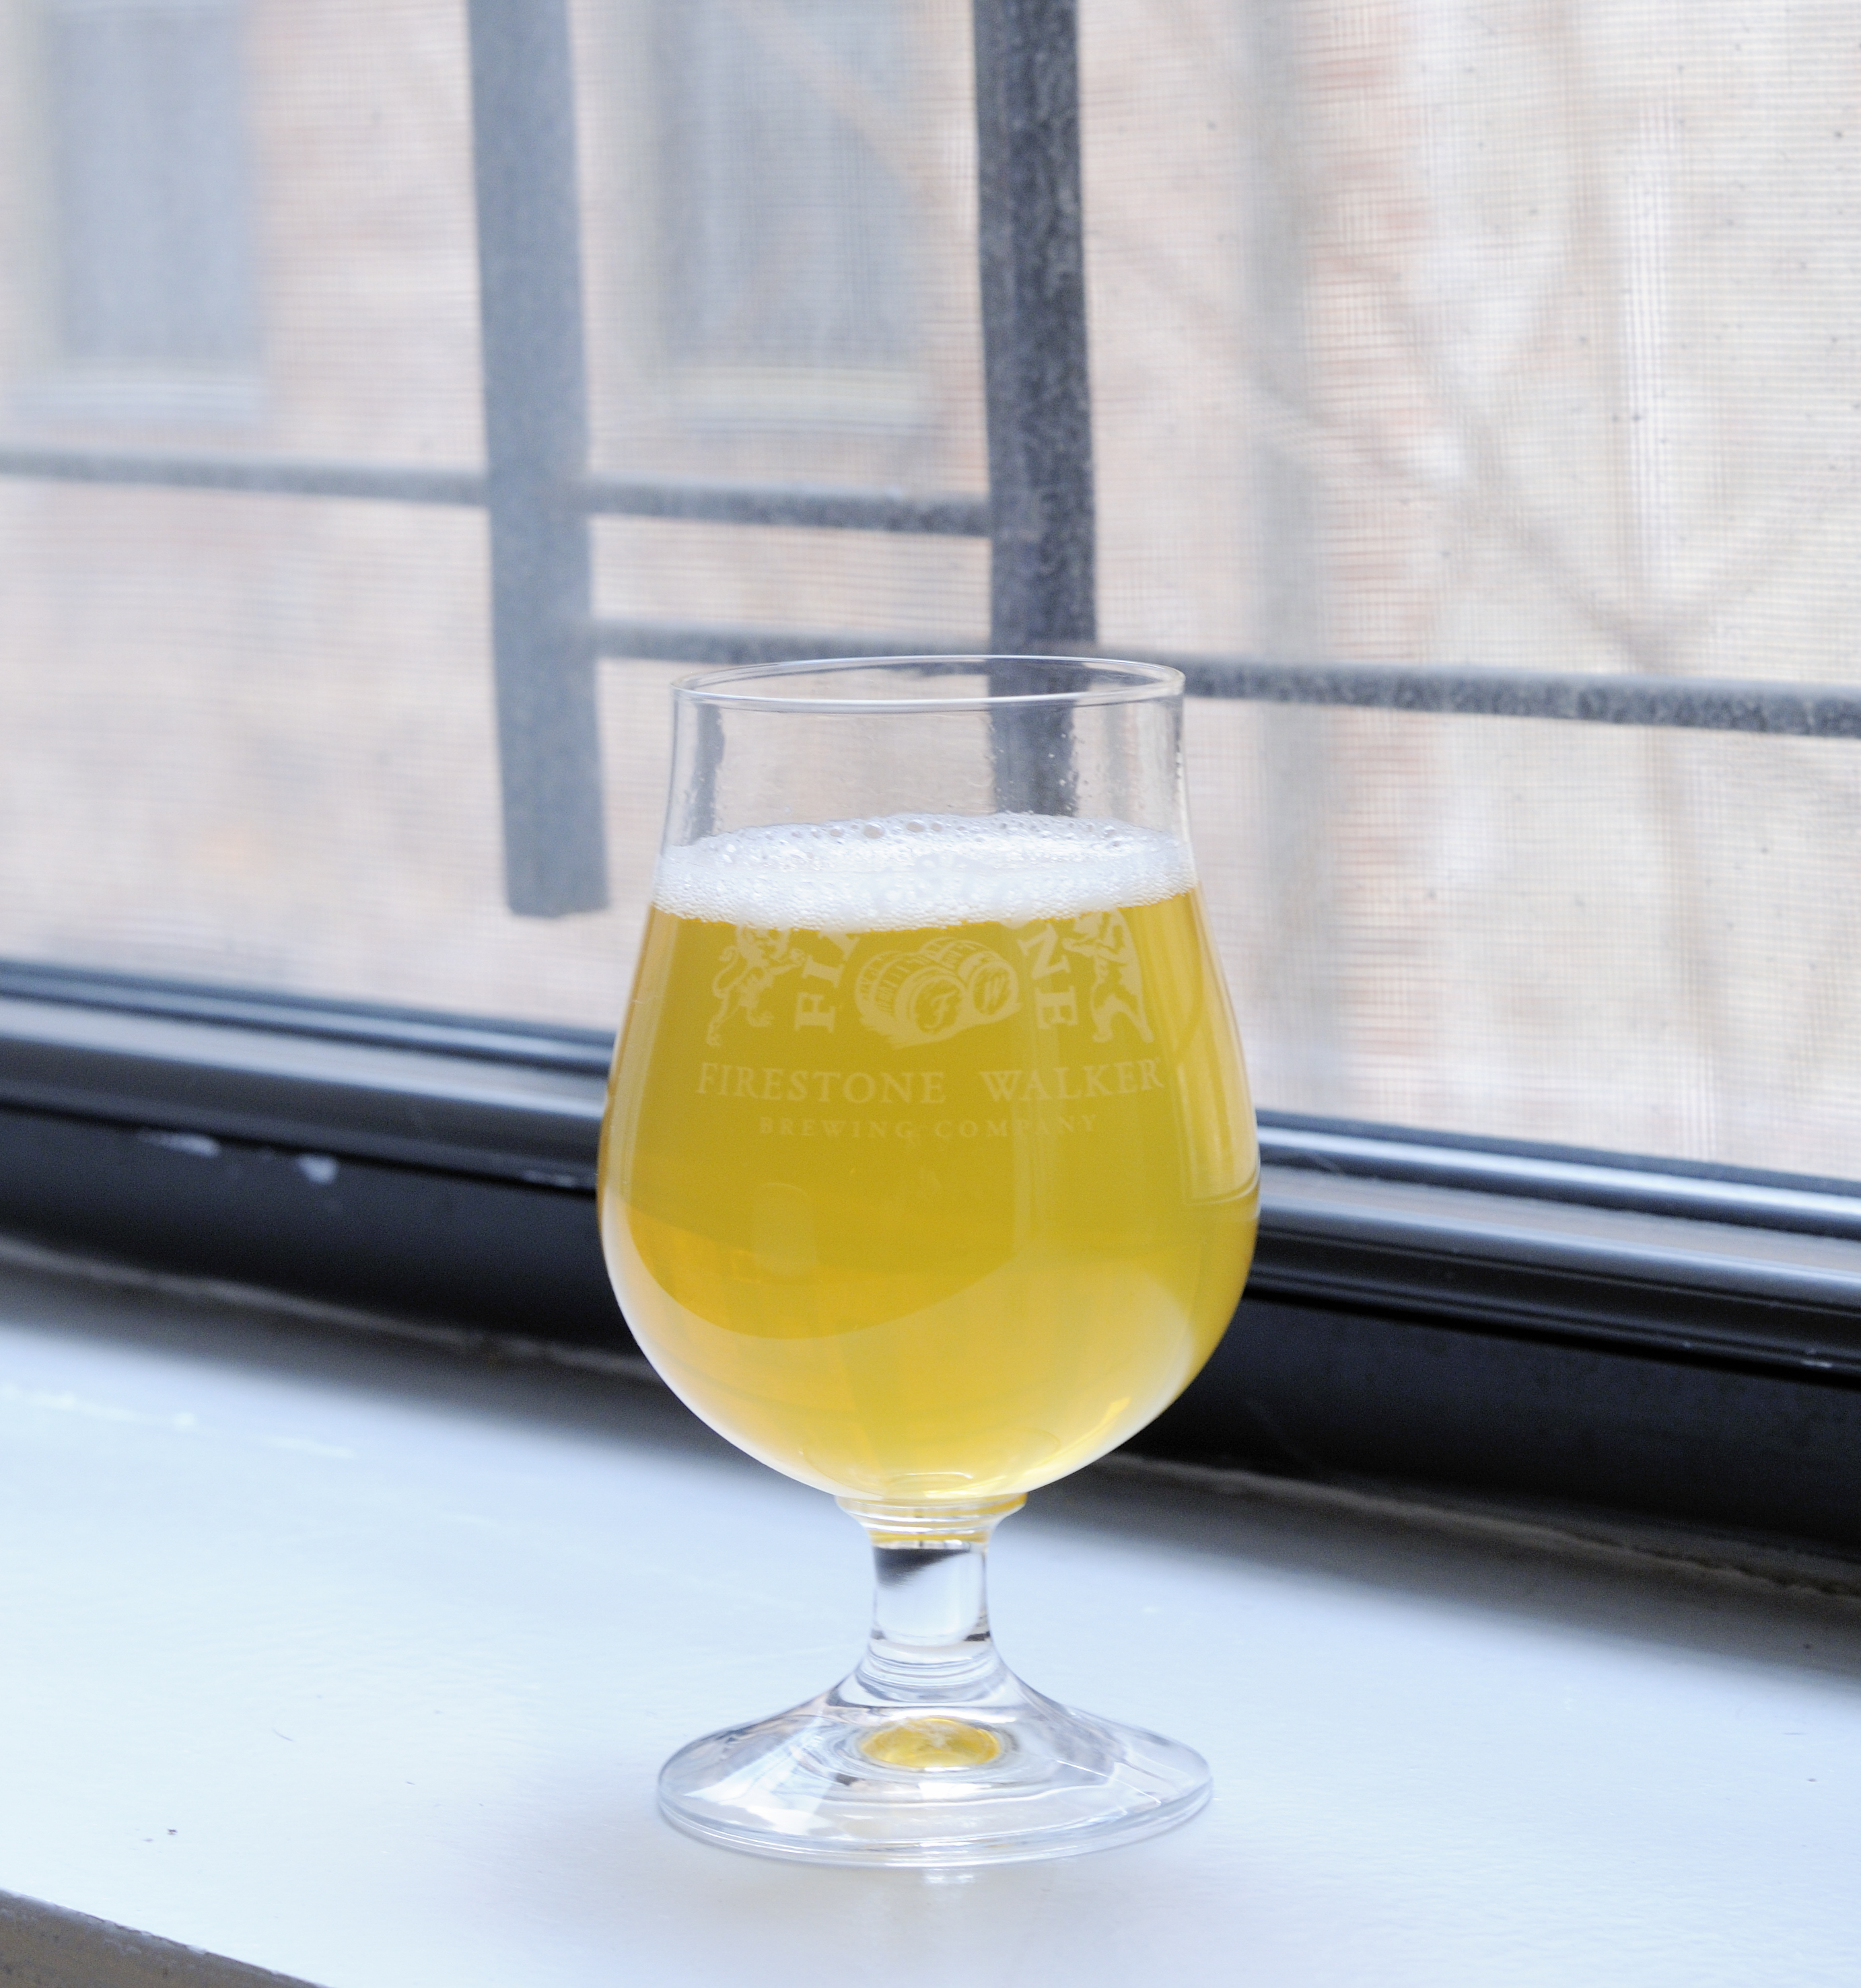 Sour Blond with Apricots